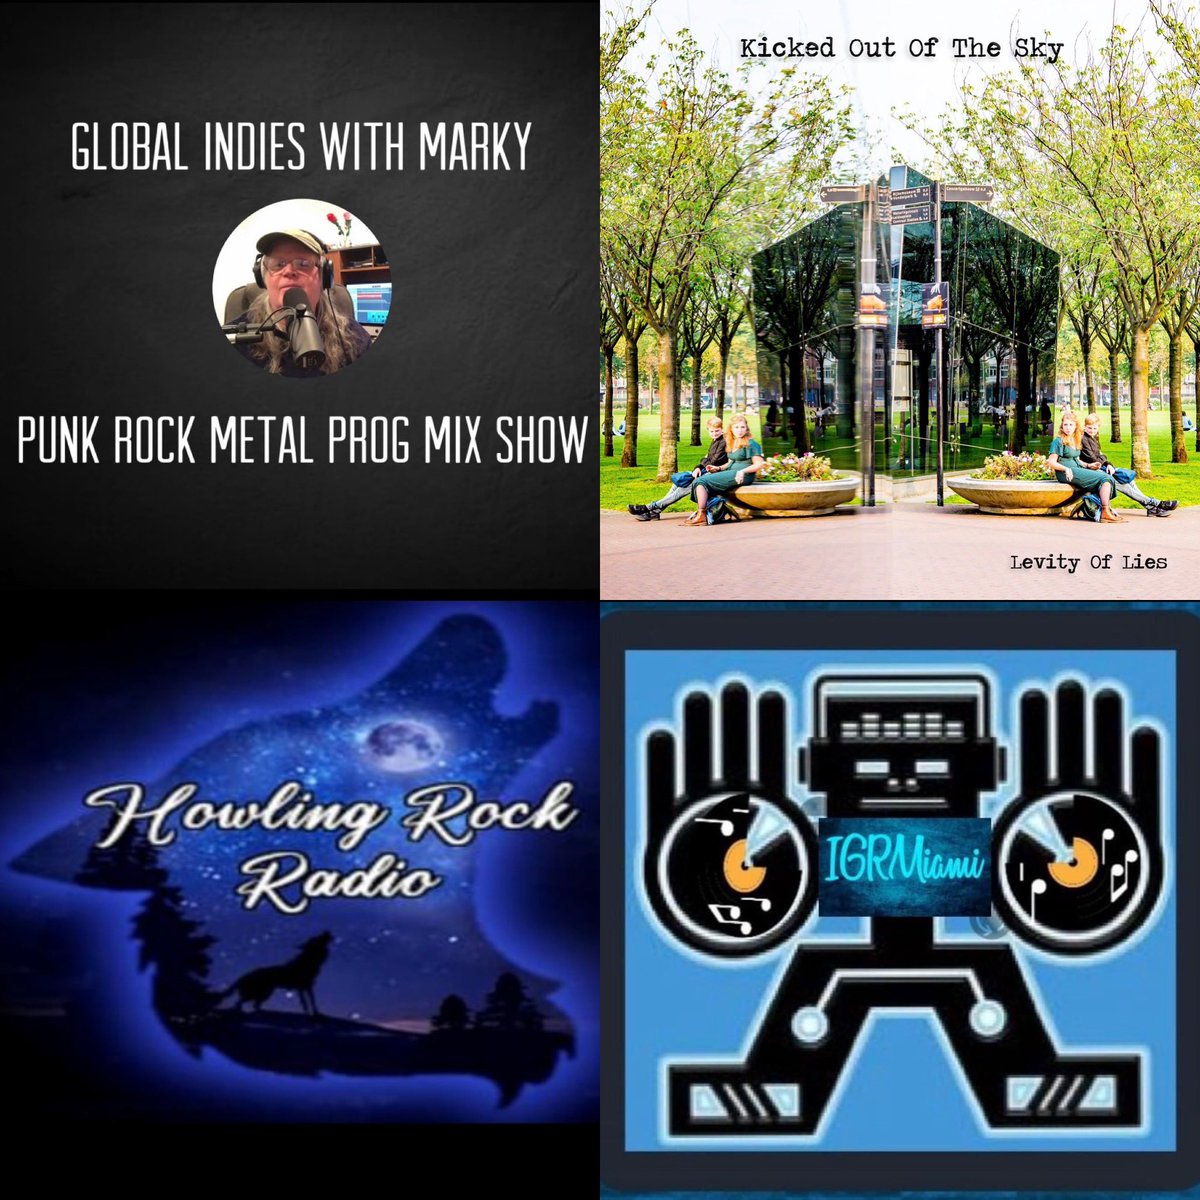 @IndiesWithMarky @HowlingRockRadi @TheMetalByrds @FrenzyTommy @DetentionLive @mysonthebum @ForgeHounds @SigPilots @luxthereal1 @GentleSavageX @SilverNightmar5 @Lifesigns_uk @theshrubs3 @GoneSavageband Tune in Mon. 05.27.24 for Global Indies With Marky on @HowlingRockRadi & IGRMiami. Thank you @IndiesWithMarky for your support!! Radio links & times: Howling Rock Radio howlingrockradio.weebly.com 5PM EST 4PM CST 10PM BST IGRMiami igrmiami.airtime.pro 1PM EST 12PM CST 6PM BST